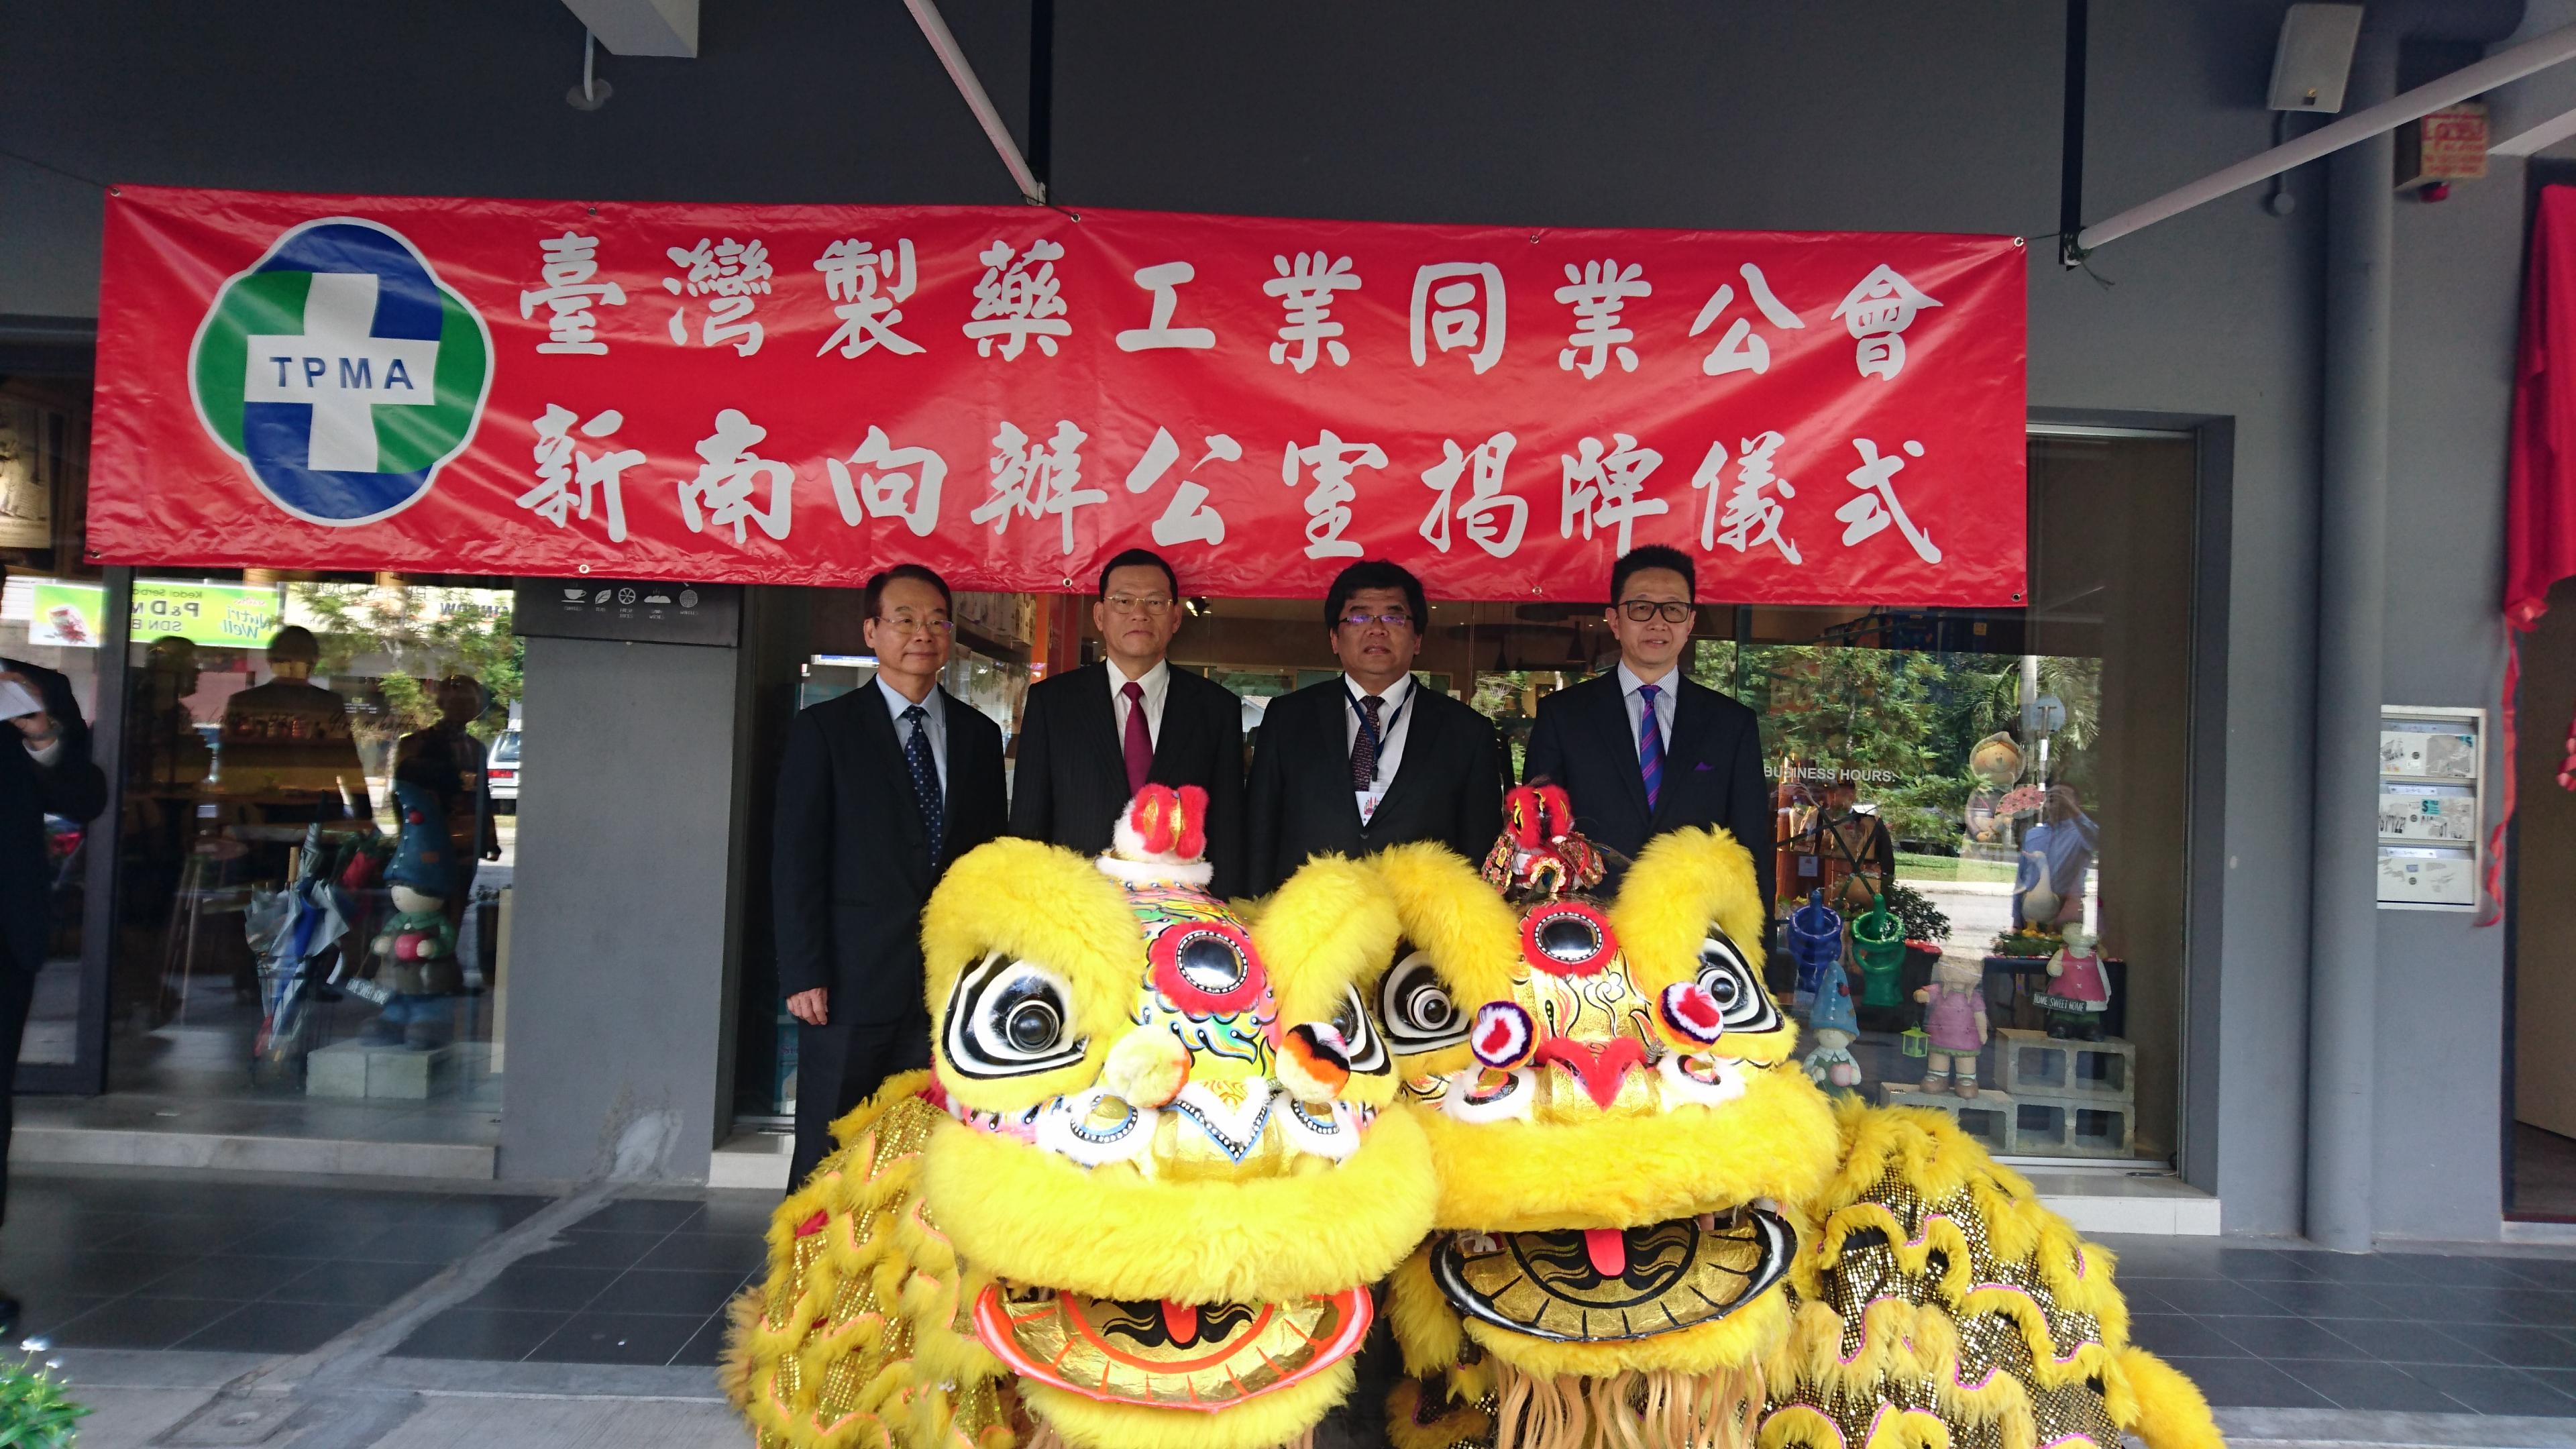  Representative Chang, James Chi-ping (second from the left) attended the “Launching Ceremony of New Southbound Office of Taiwan Pharmaceutical Manufacturer’s Association” in Kuala Lumpur on 3 June, 2017